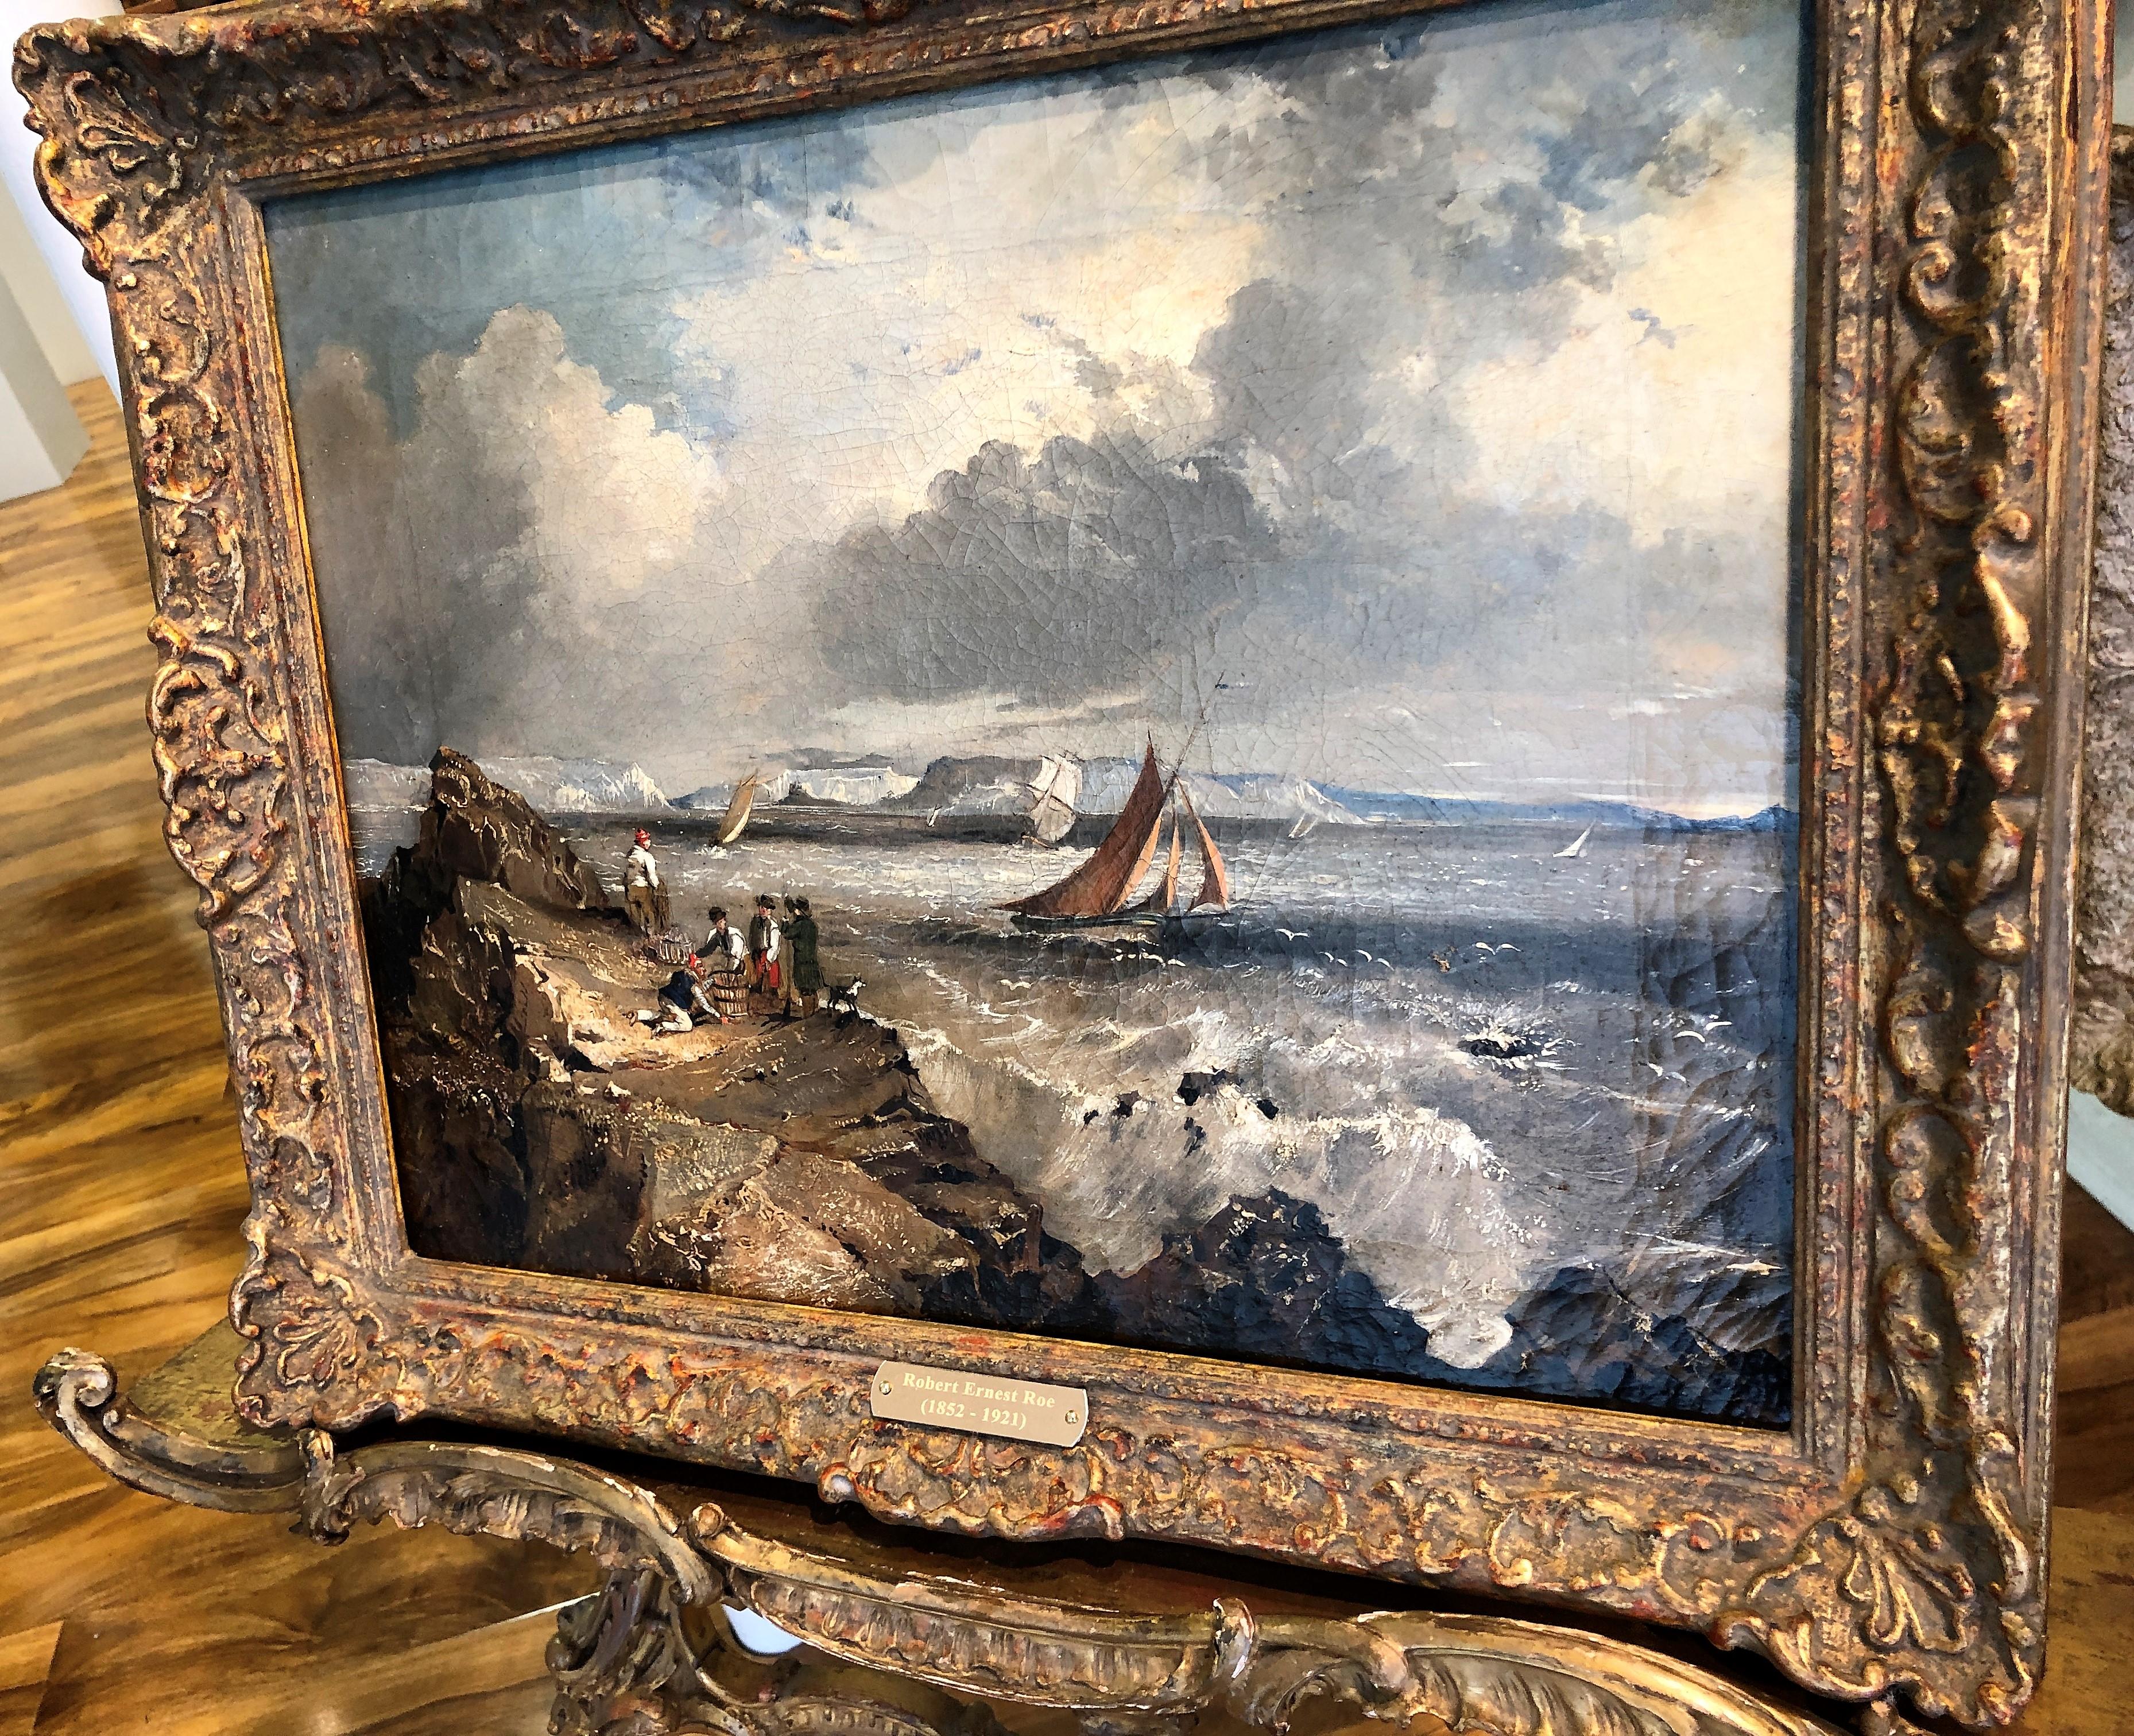 VERY RARE Oil PAINTING Antique 19th Century By Listed artist British old master

OLD MASTER OIL PAINTING BRITISH SCHOOL 19th Century Gold Frame

Description

Late 19th century

“Good Condition on Canvas 